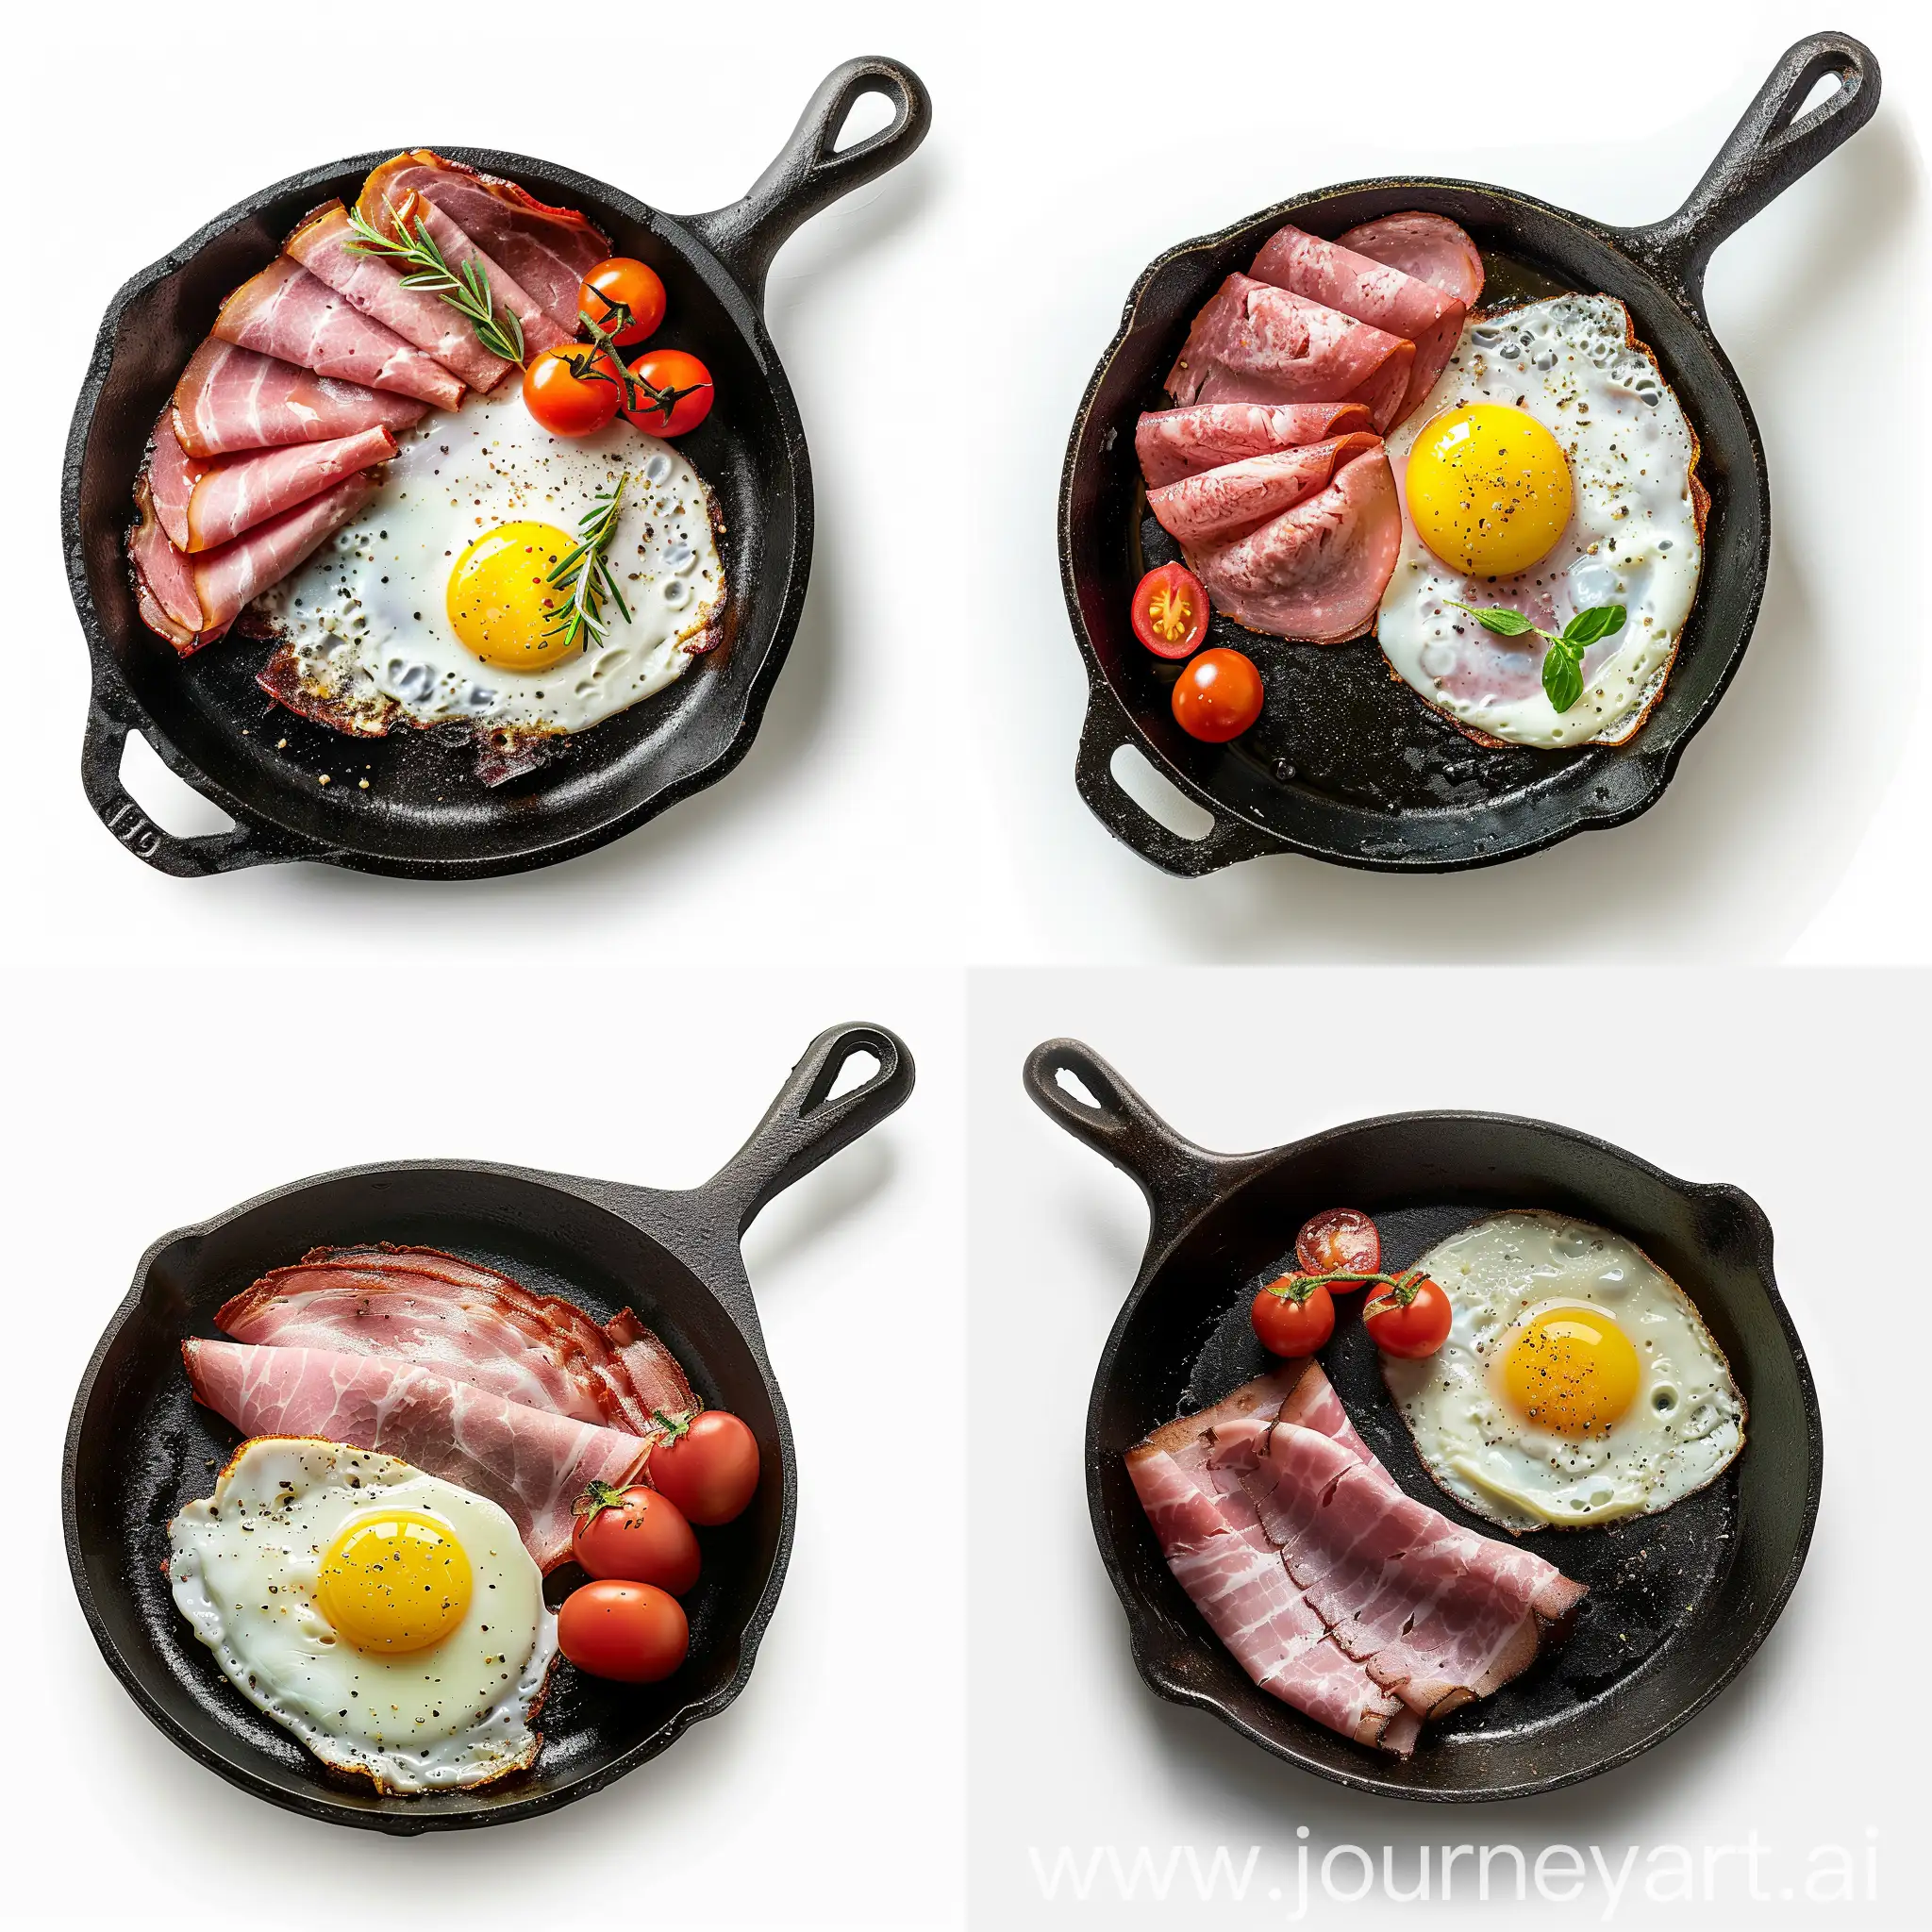 Delicious-Breakfast-Ham-and-Egg-Skillet-with-Cherry-Tomatoes